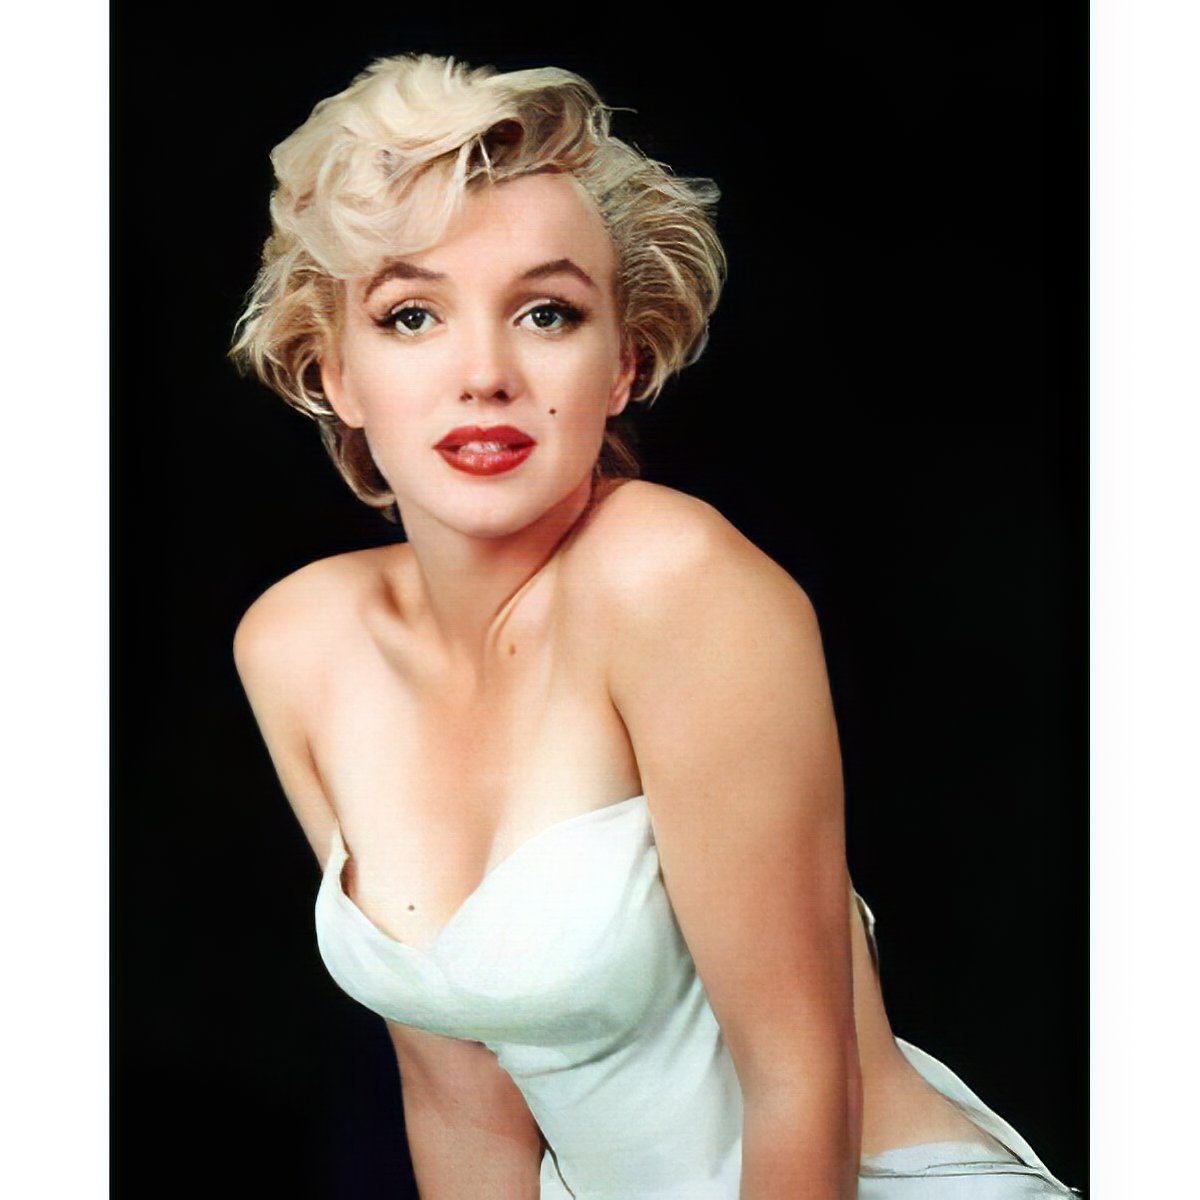 Embrace the classic beauty of Marilyn Monroe in this piece.Marilyn Monroe - Diamondartlove